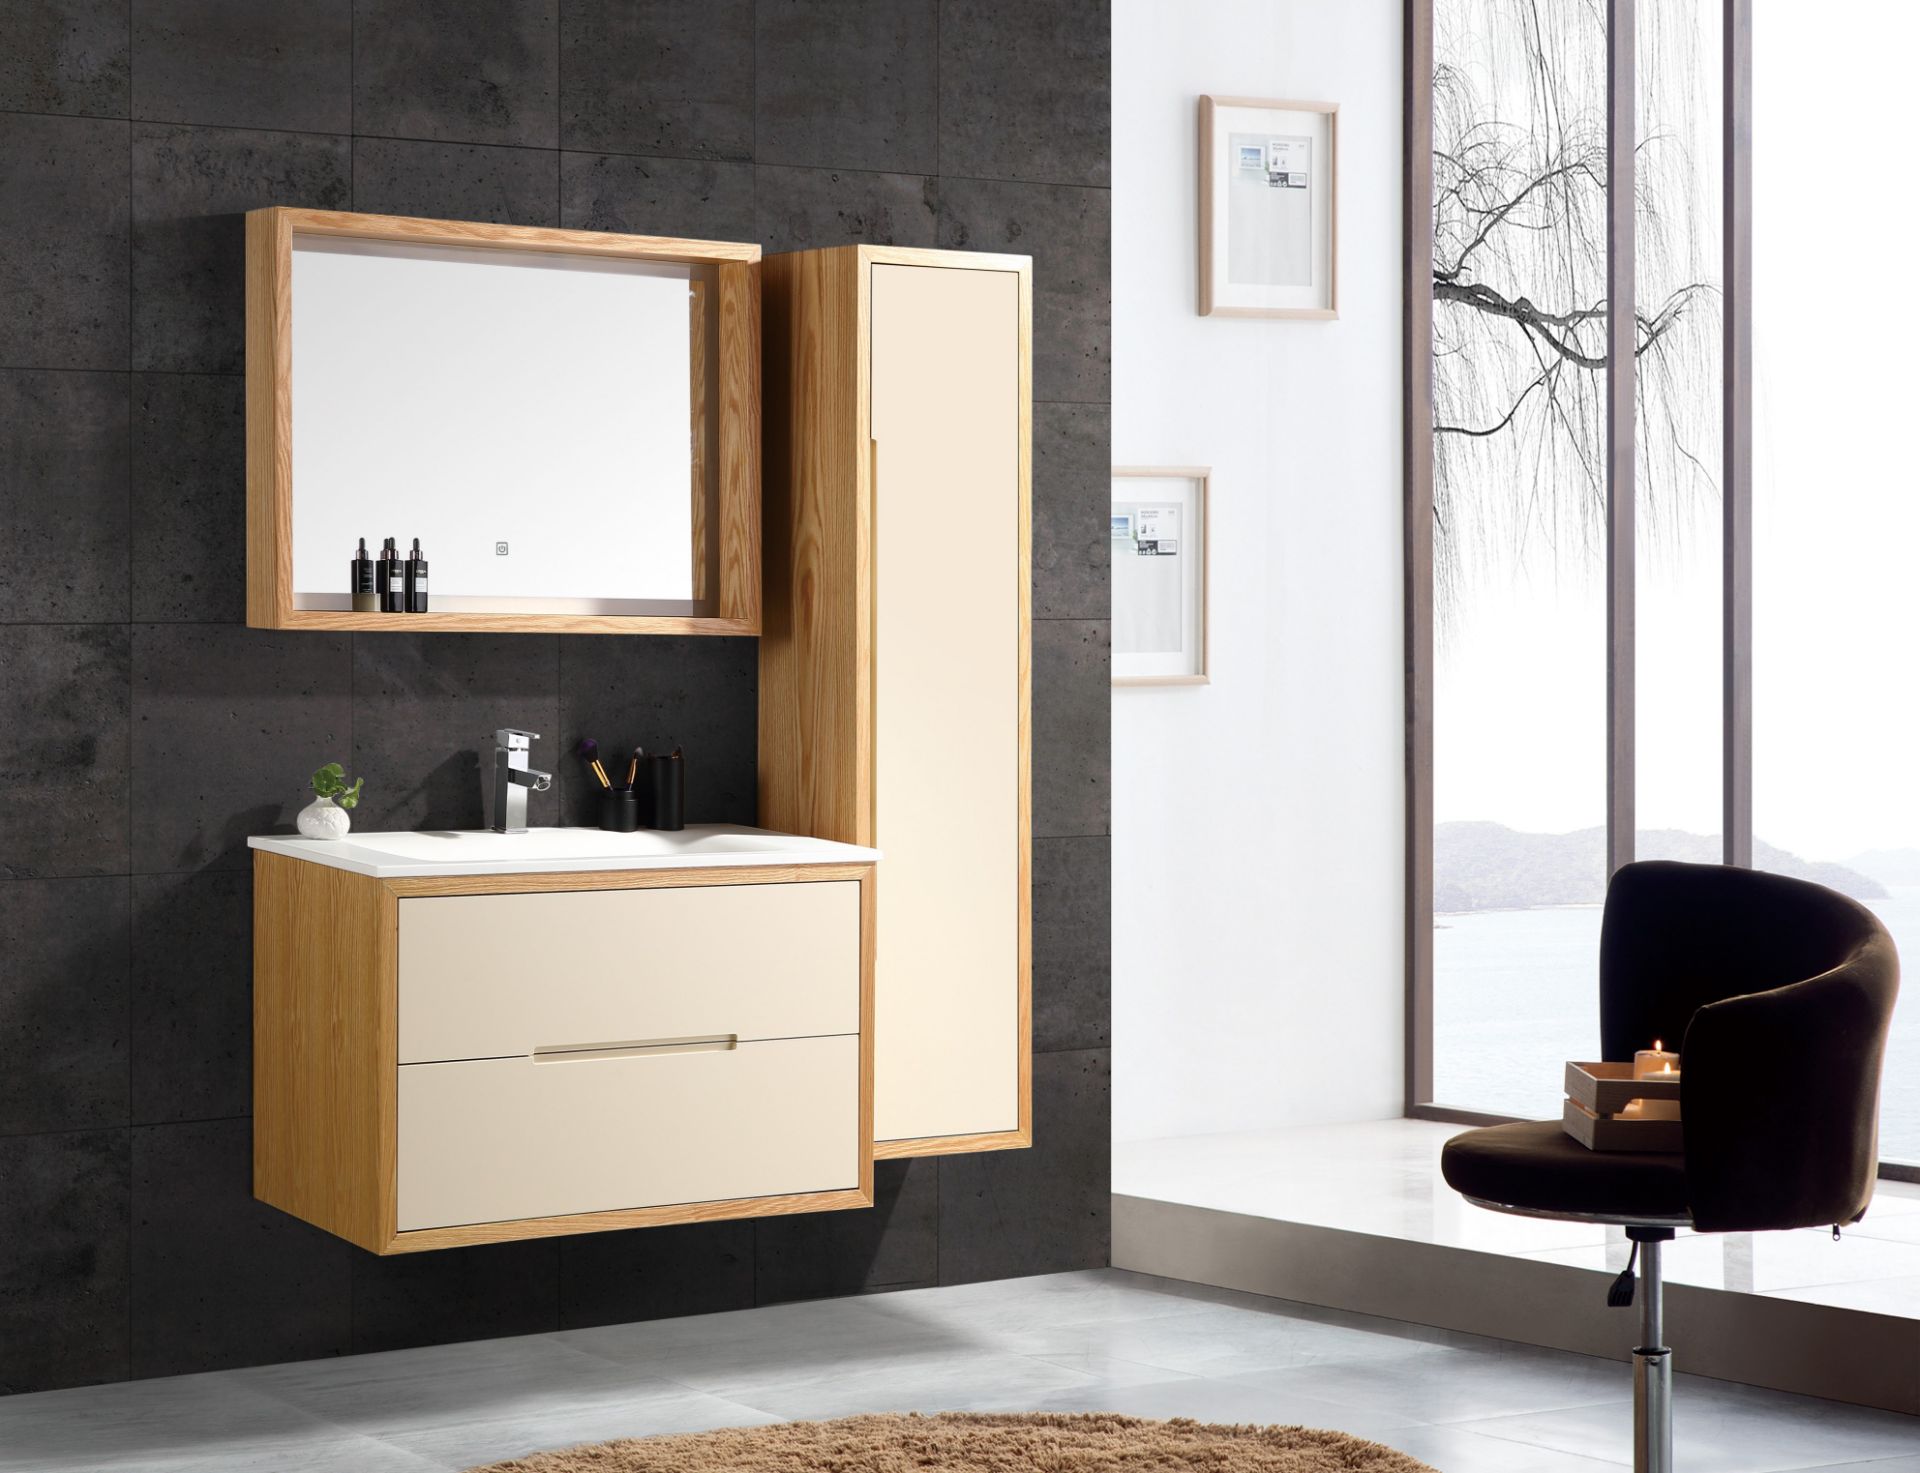 Complete Vanity Unit Set in Beige with fixtures and fittings RRP £799.99 *NO VAT*